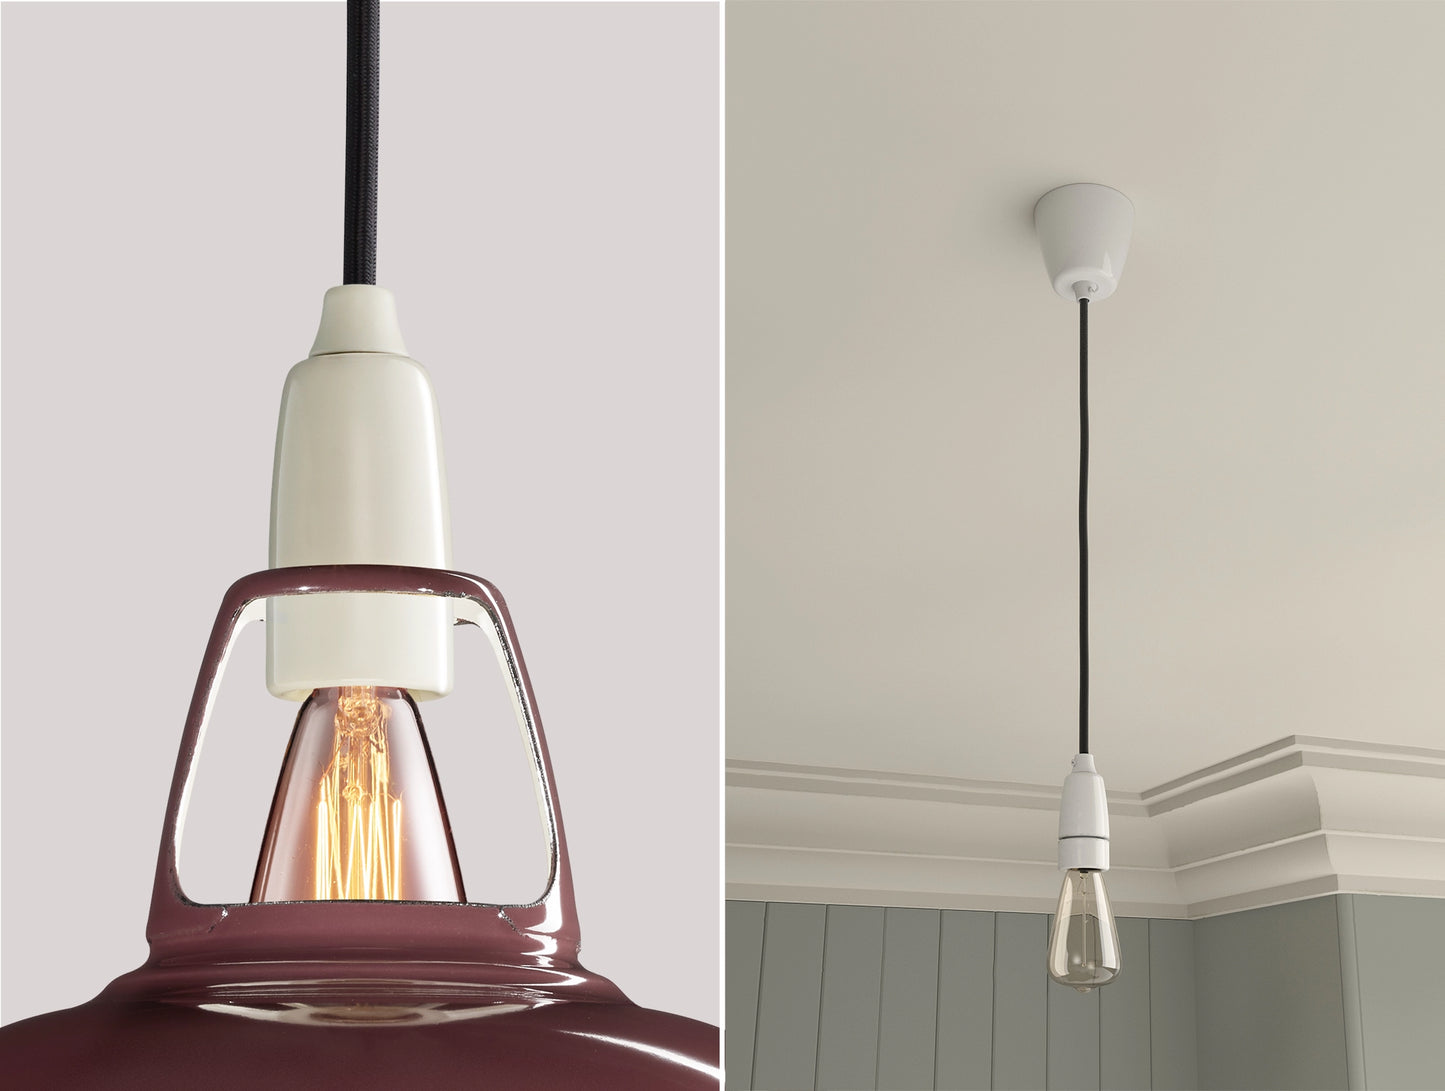 Close up of an E14 Porcelain suspension set on a Metropolitan lampshade on the left. On the right, an E14 Porcelain pendant set with a lightbulb is hanging from the ceiling